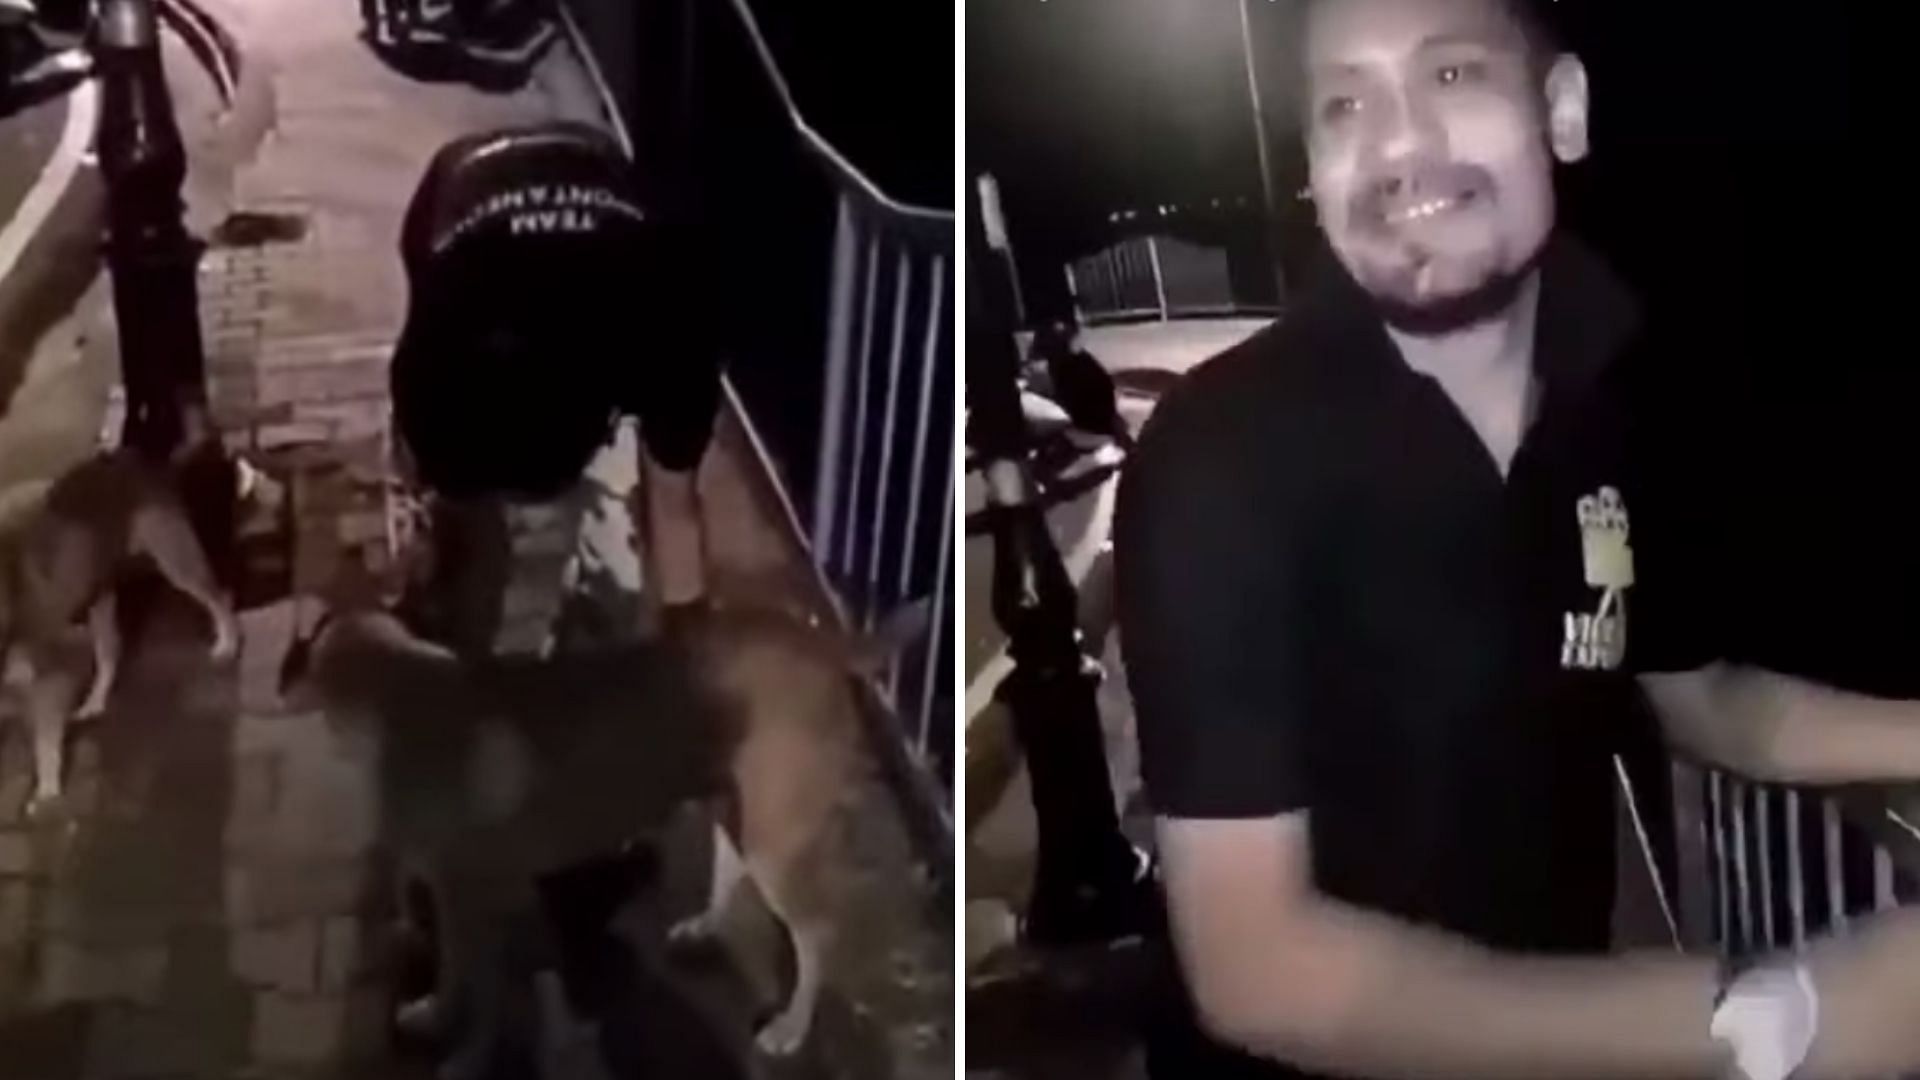 In the video, that has since sparked outrage on the internet, a man can be seen picking up a dog, and hurling it into the river, with the Hindi-movie song “Tera Baap Aaya” playing in the background.